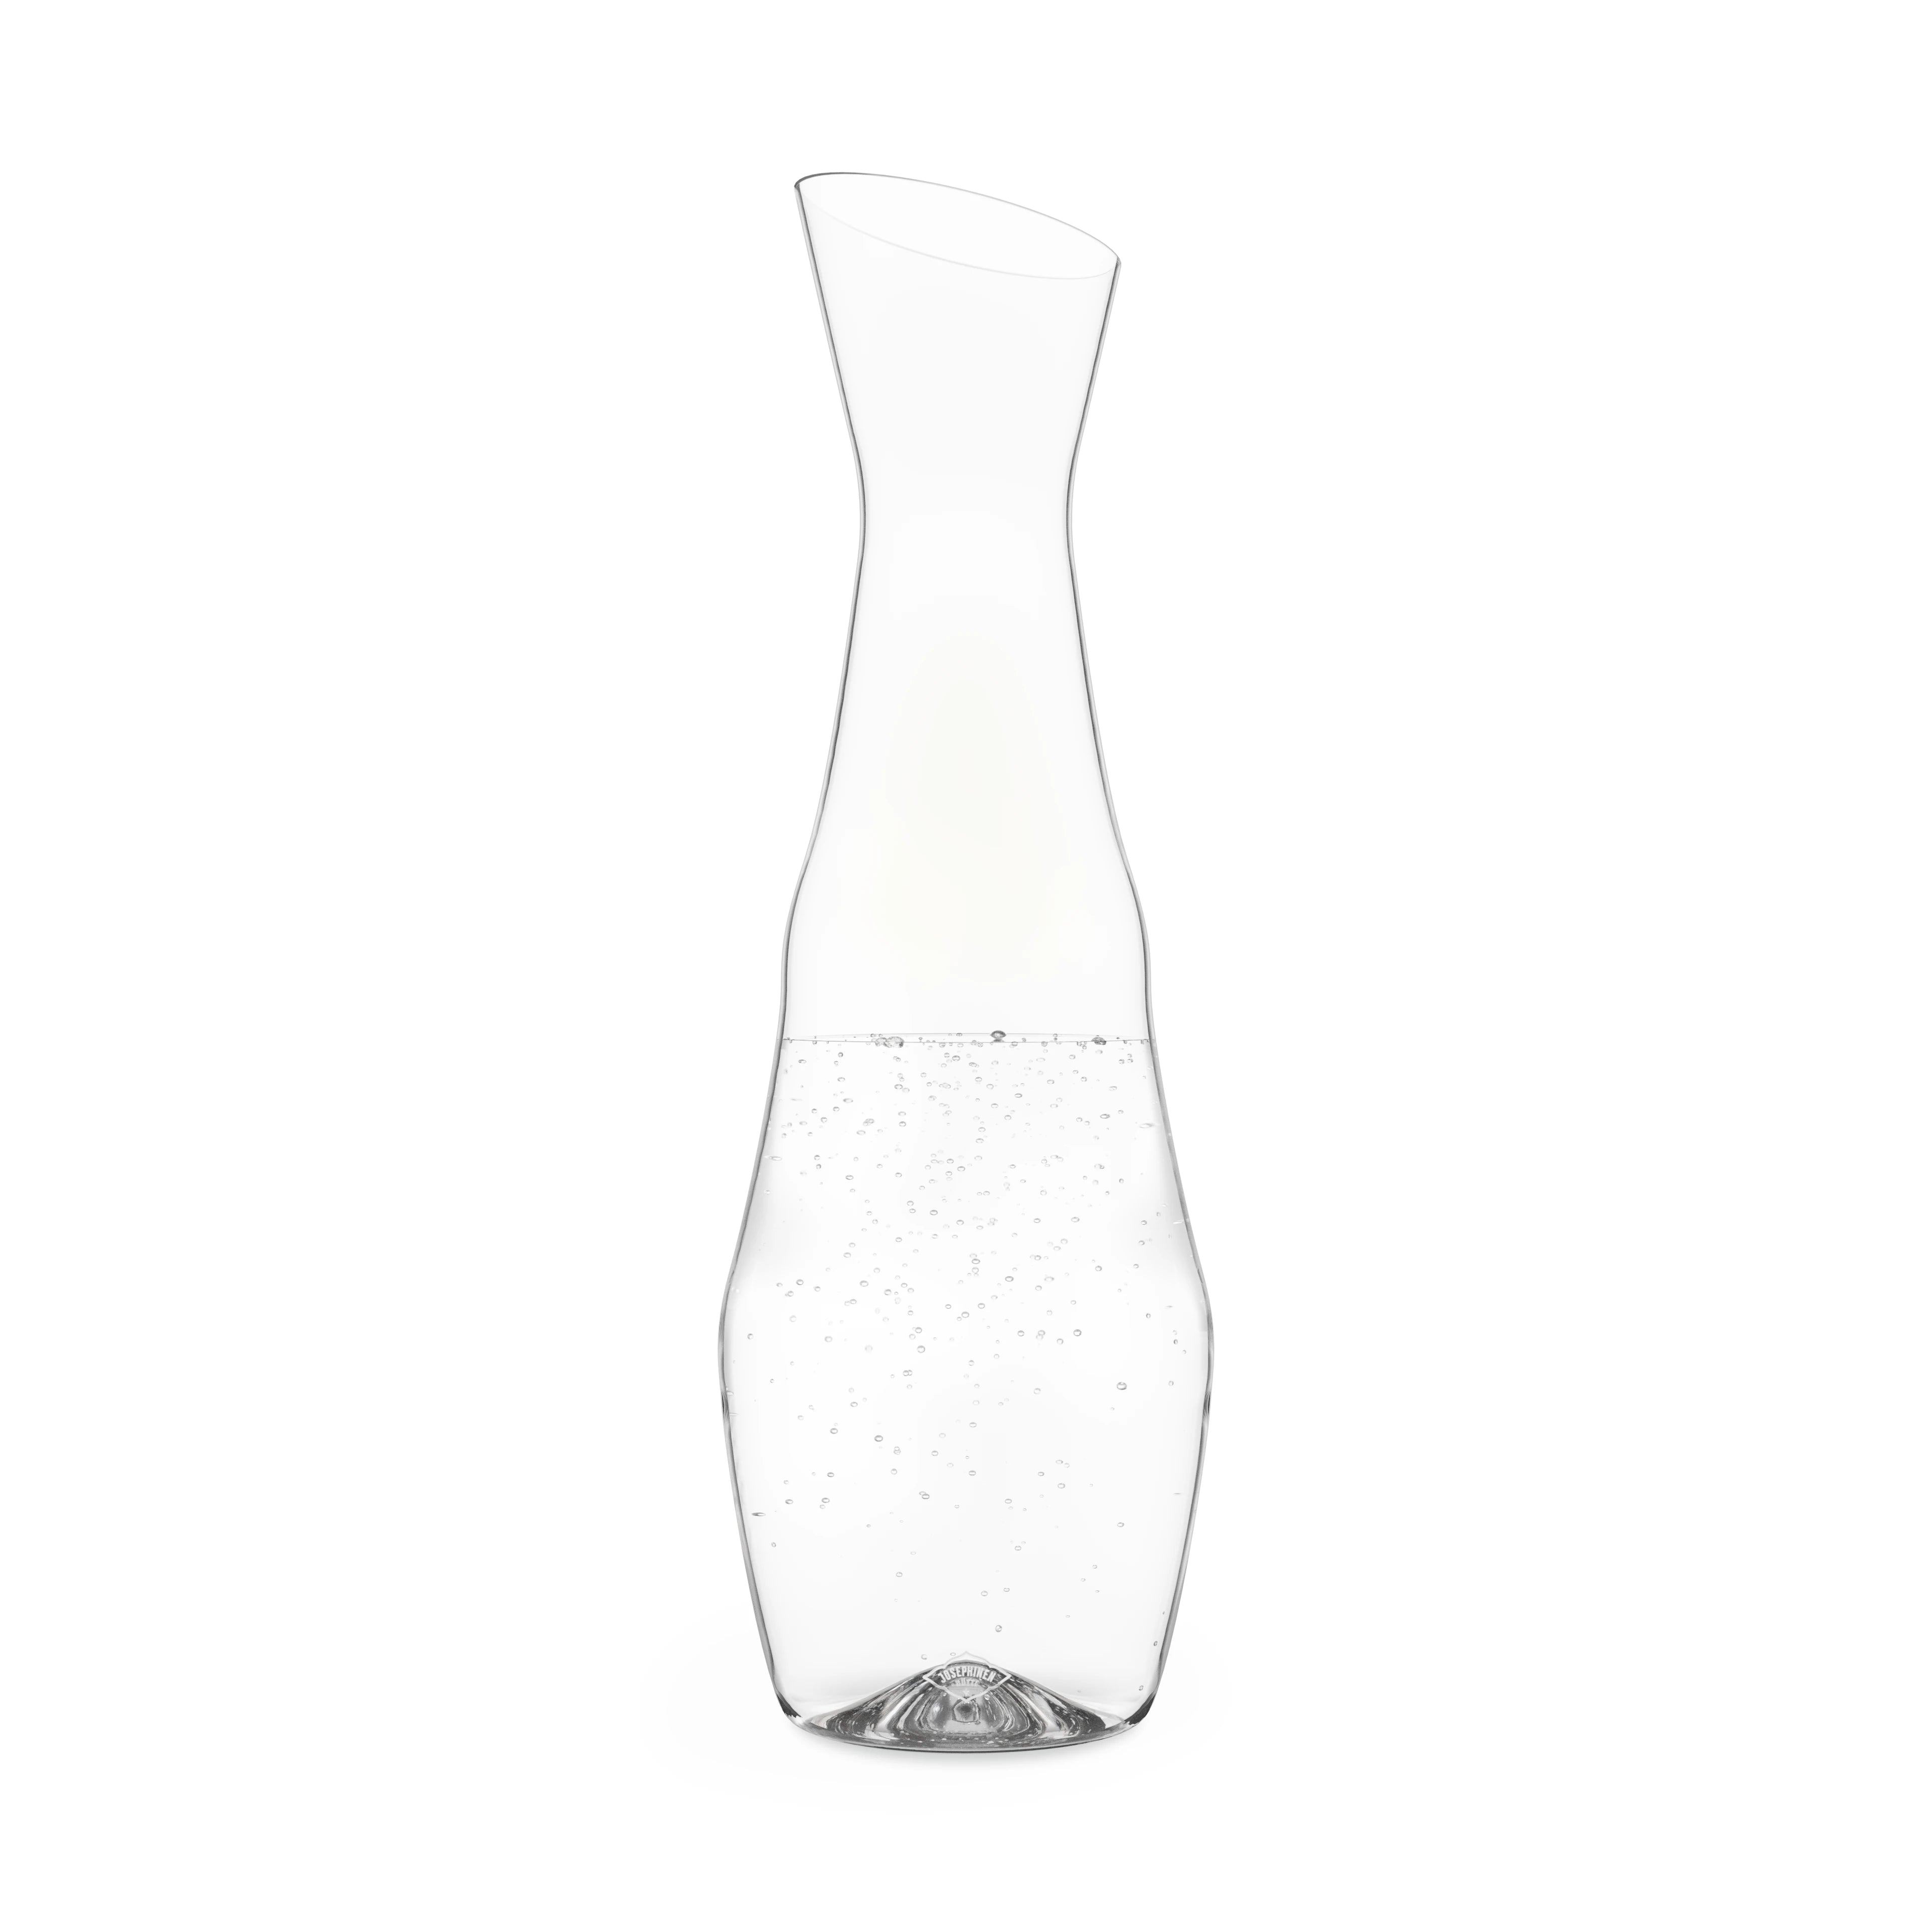 JOSEPHINE Carafe by Josephinenhütte, filled with water